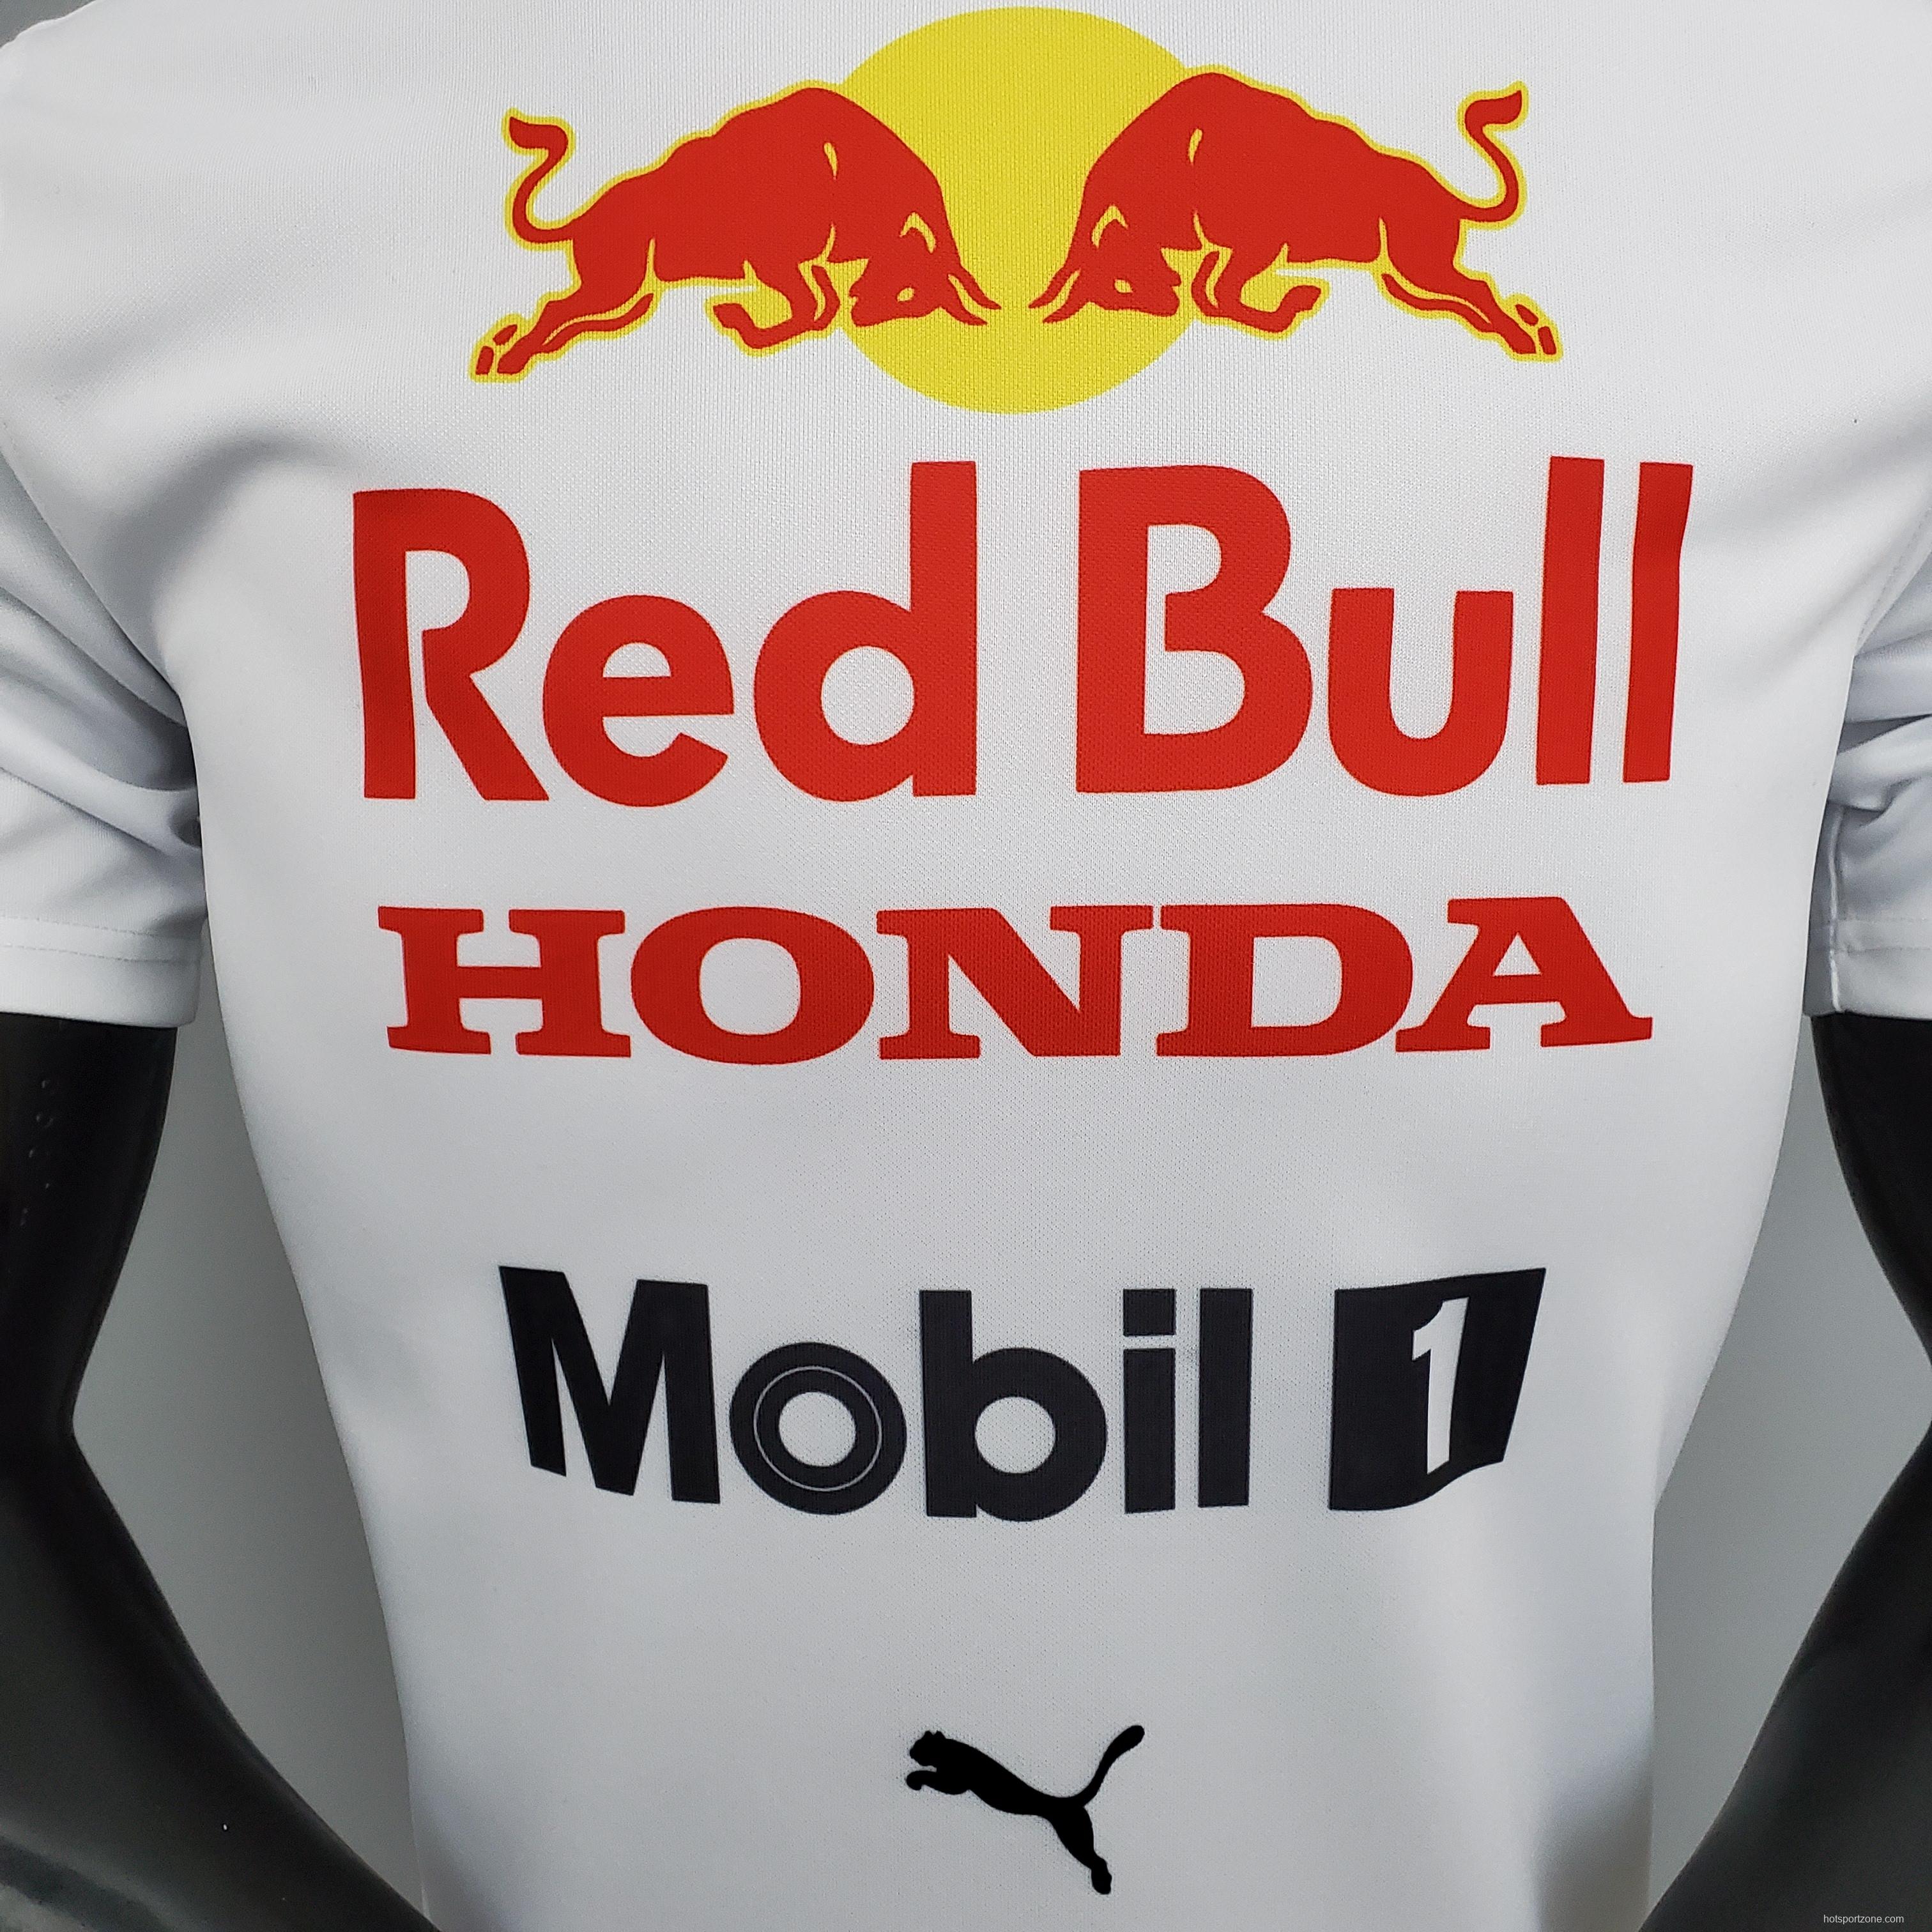 F1 Red Bull Special Edition S-5XL